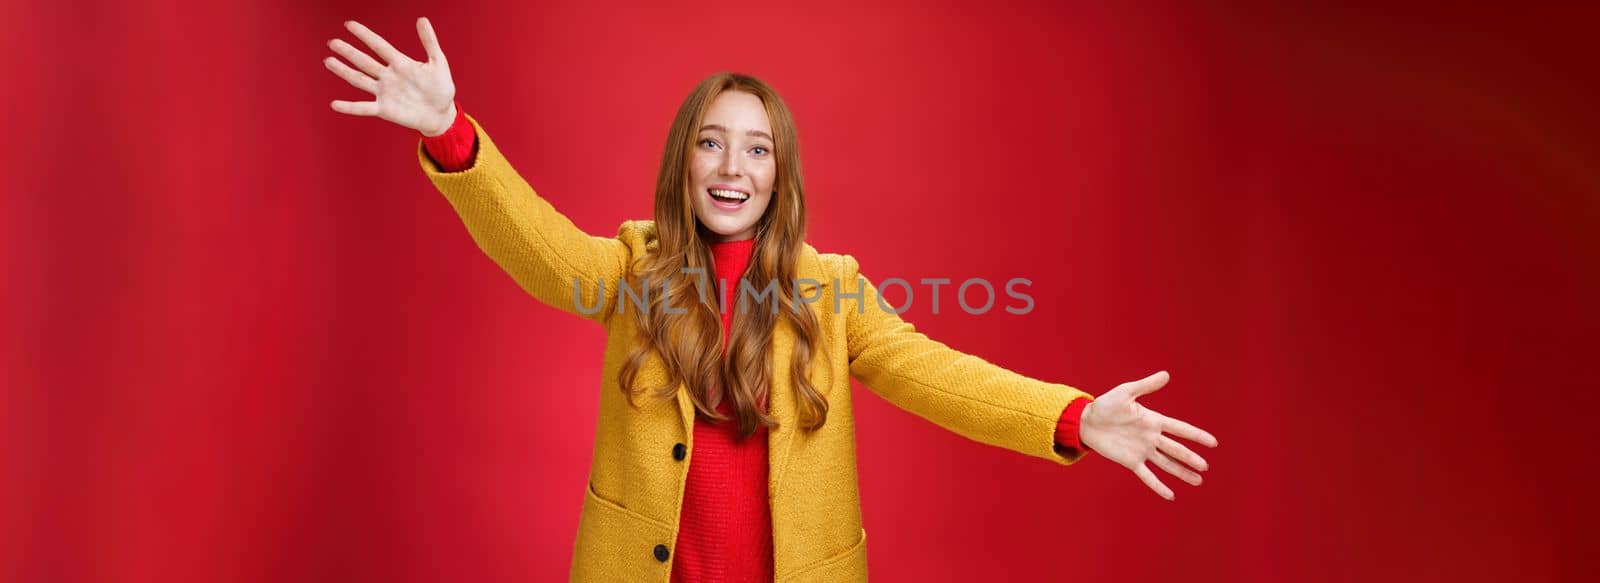 Hey come and hug me friend. Charming playful and emotional redhead female extanding palms forward to cuddle and greet, giving warm welcome smiling broadly posing in yellow coat over red wall.